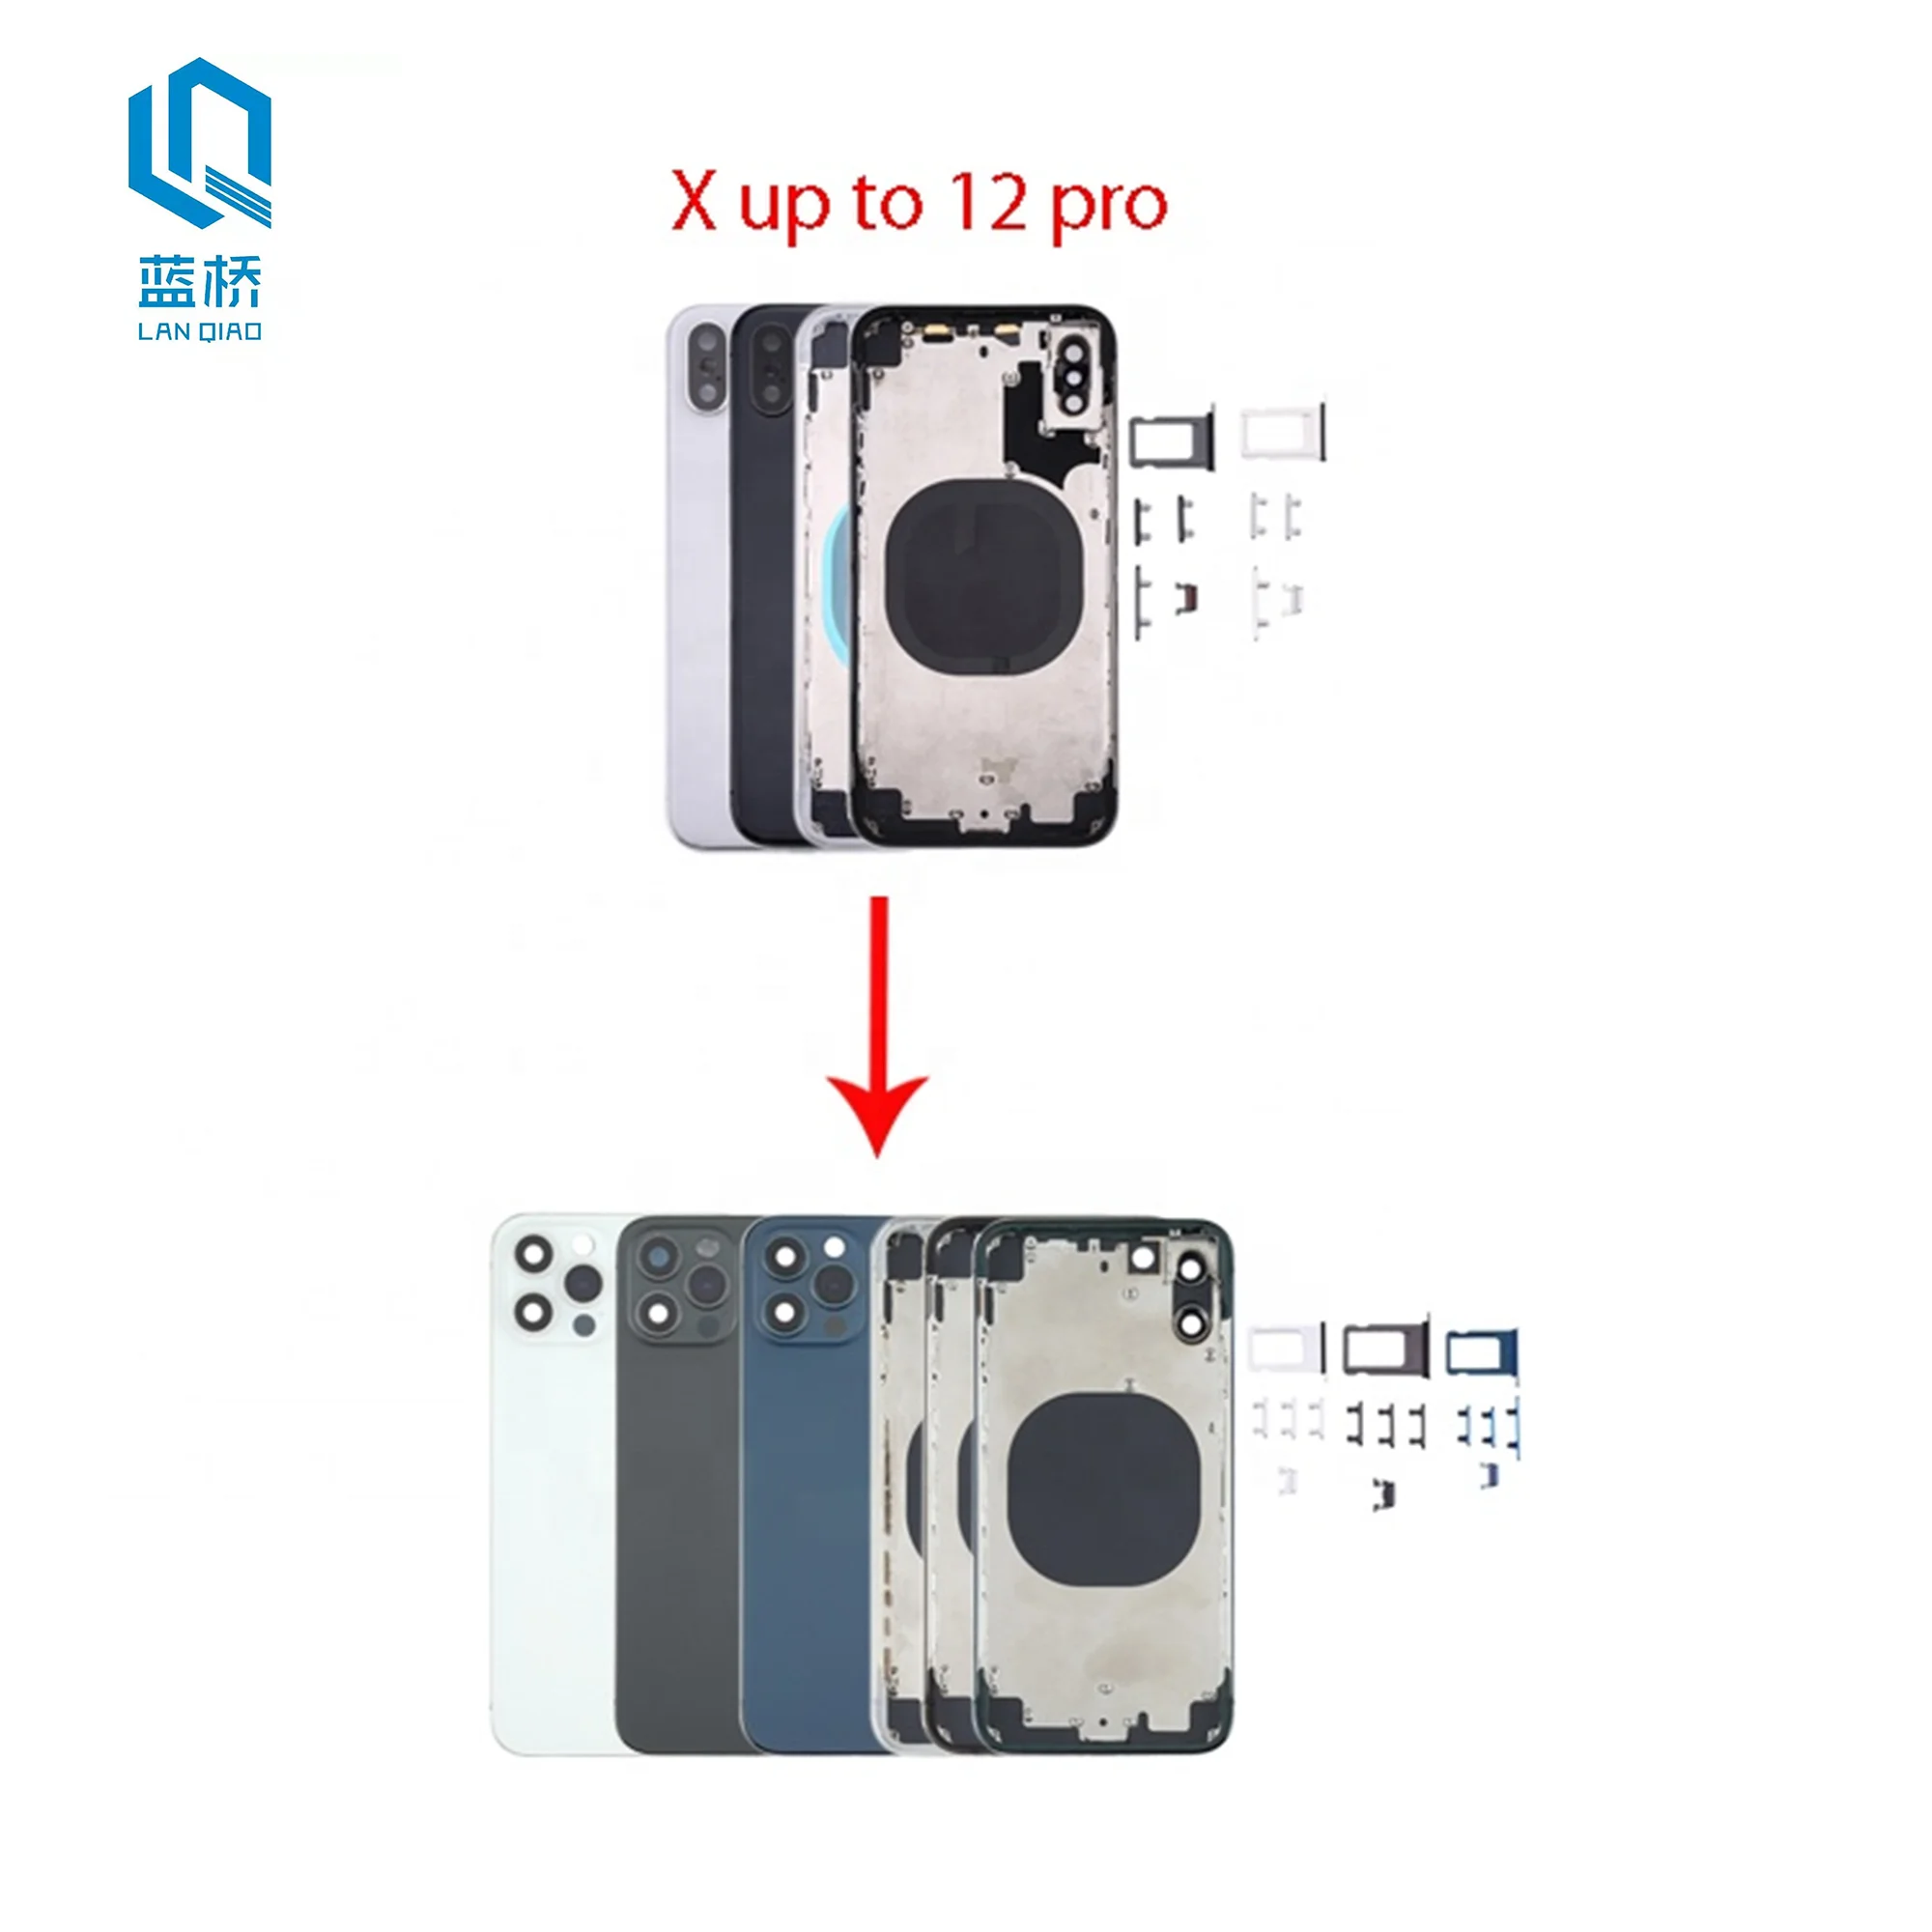 DIY custom Mobile phone housings for iphone XR upgrade Convert Into 12 13 for iphone x like 12 13 pro battery back glass housing